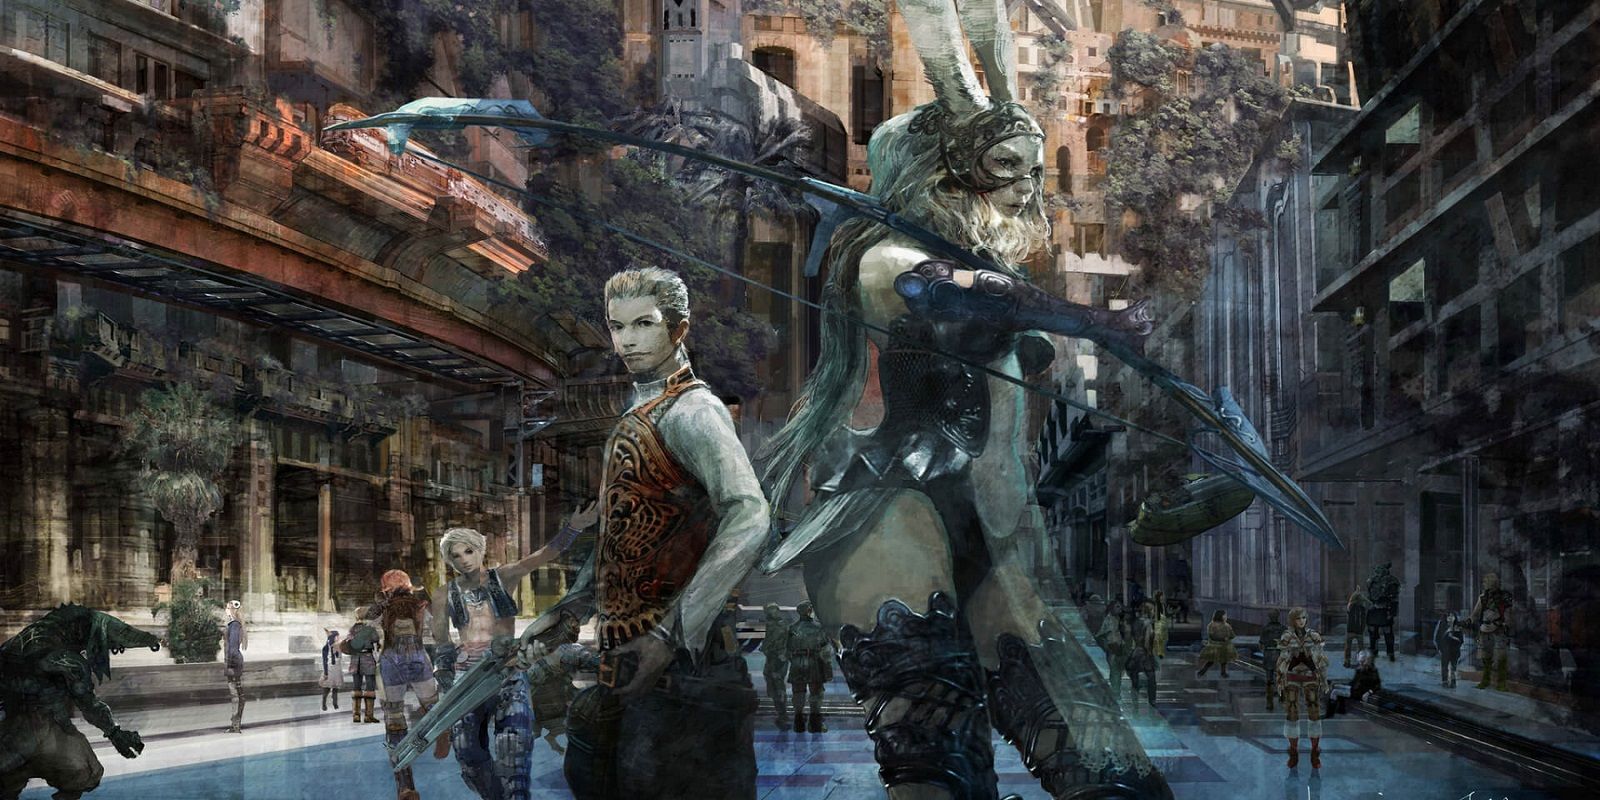 The heroes from Final Fantasy XII